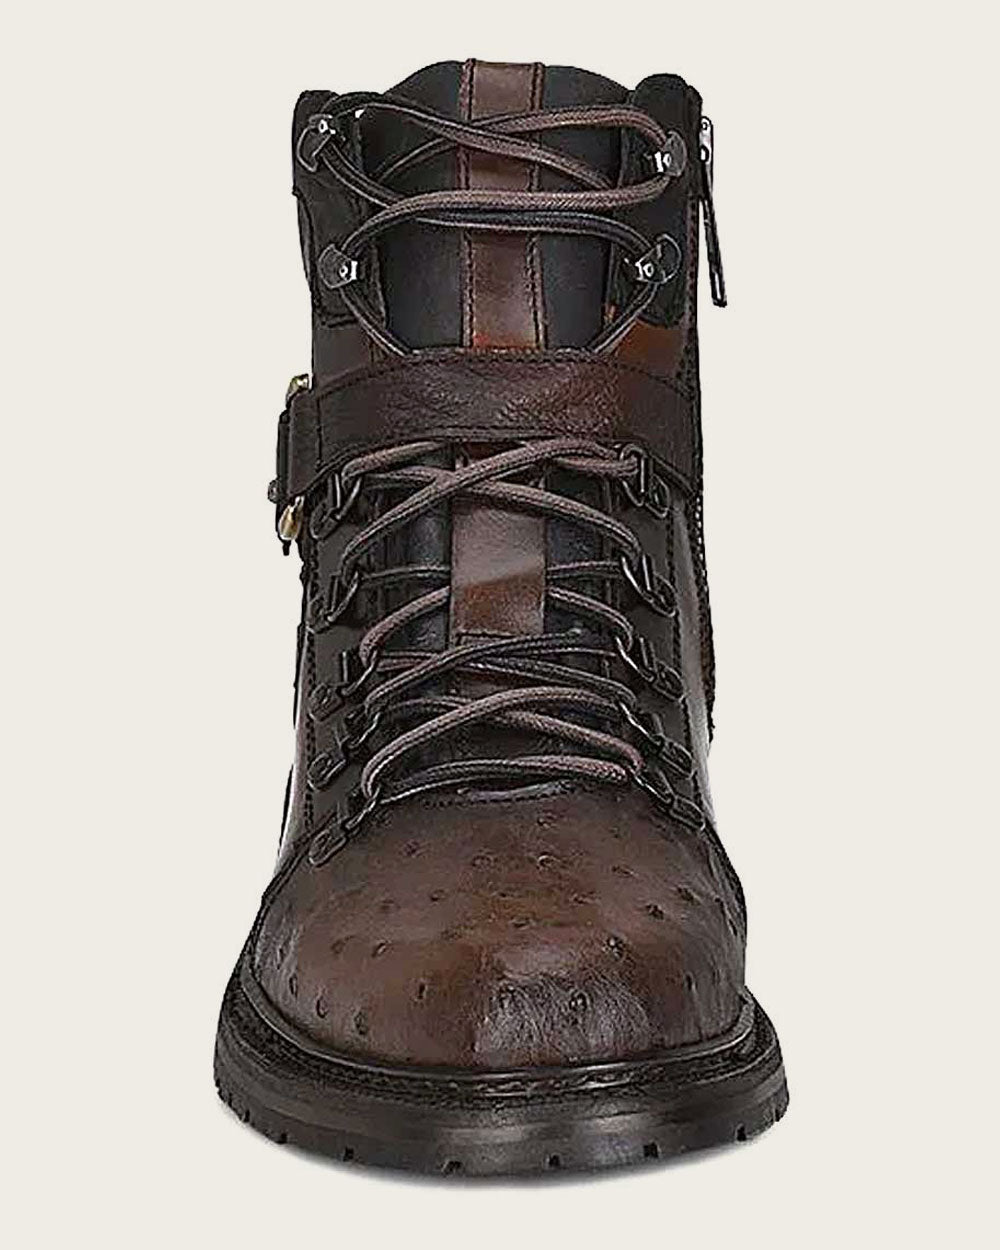 Comfortable Ostrich Boots: Laces & Easy Wear. 